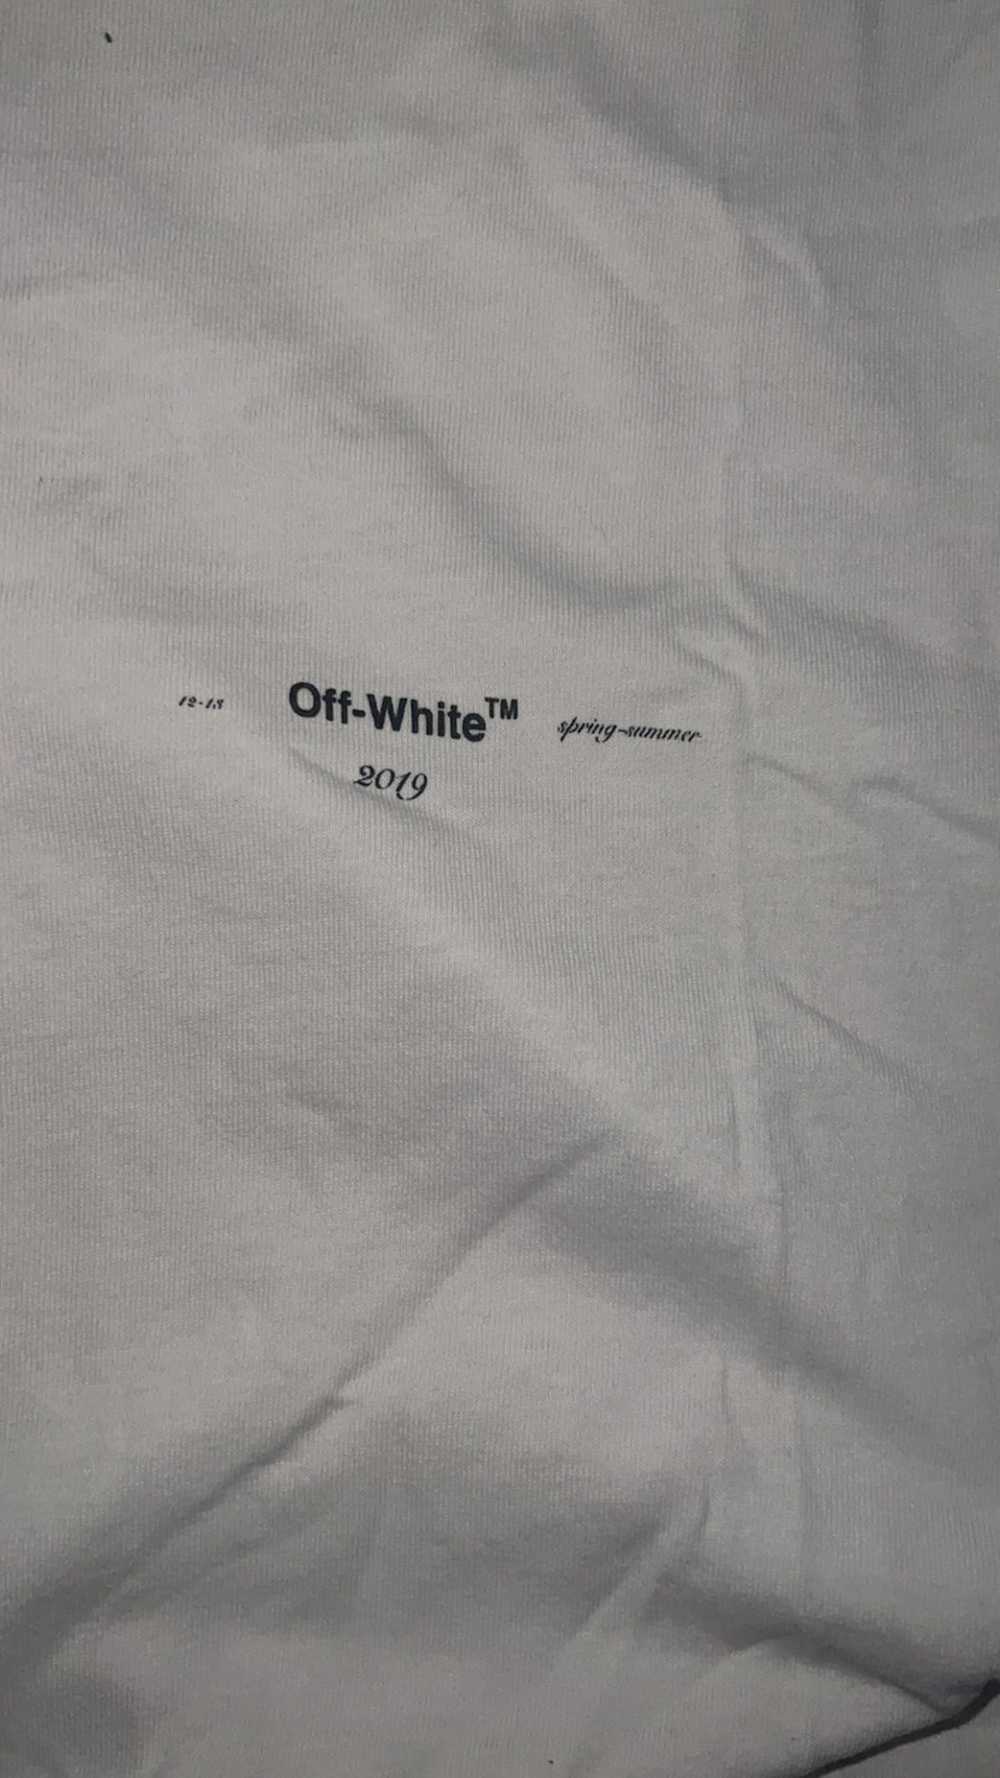 Off-White Offwhite painter tee - image 2